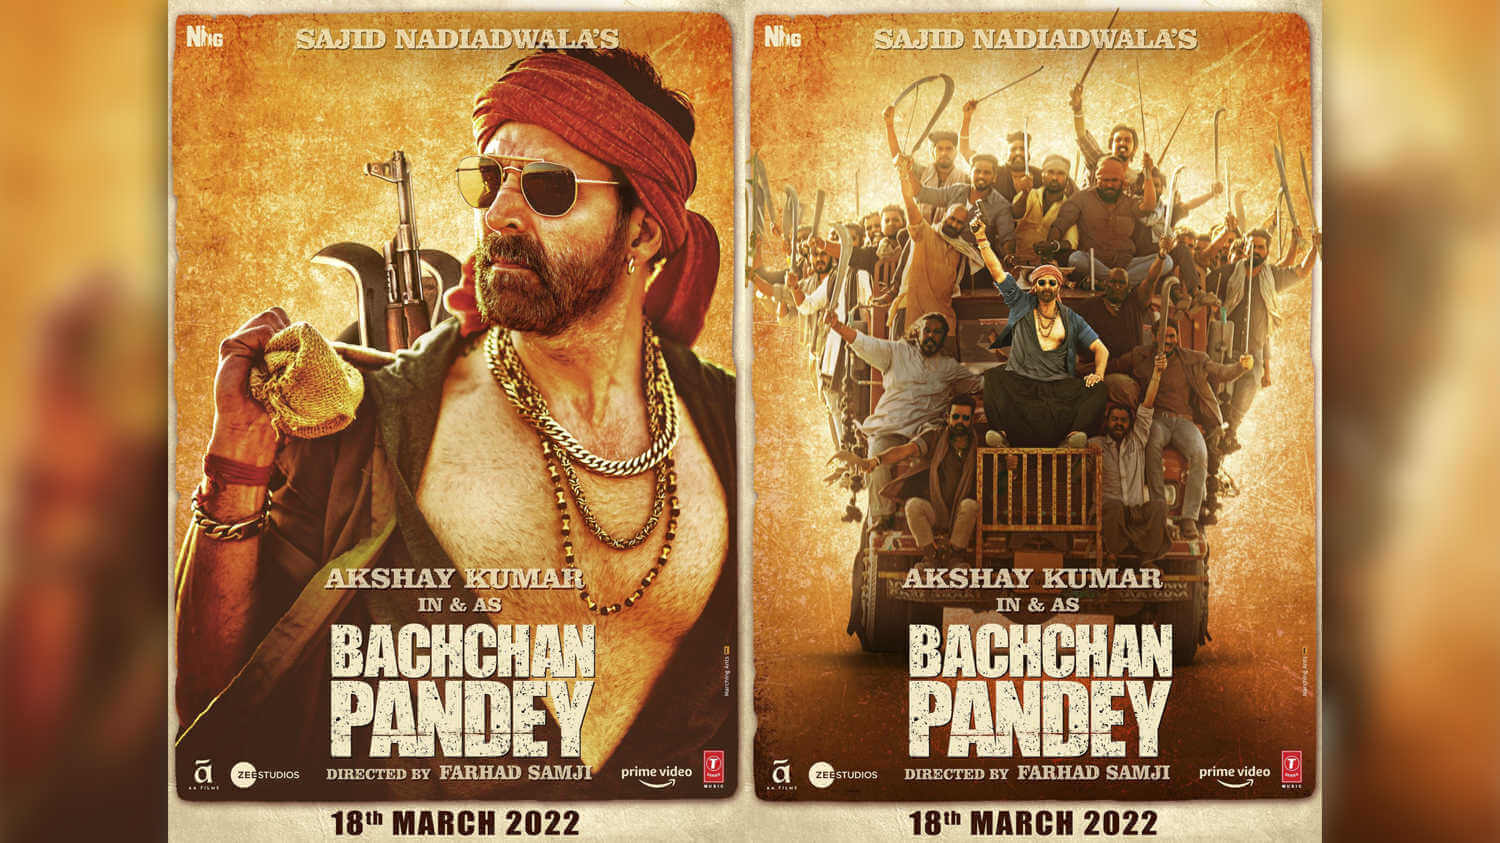 Bachchan Pandey starring Akshay Kumar to release in cinemas on March 18